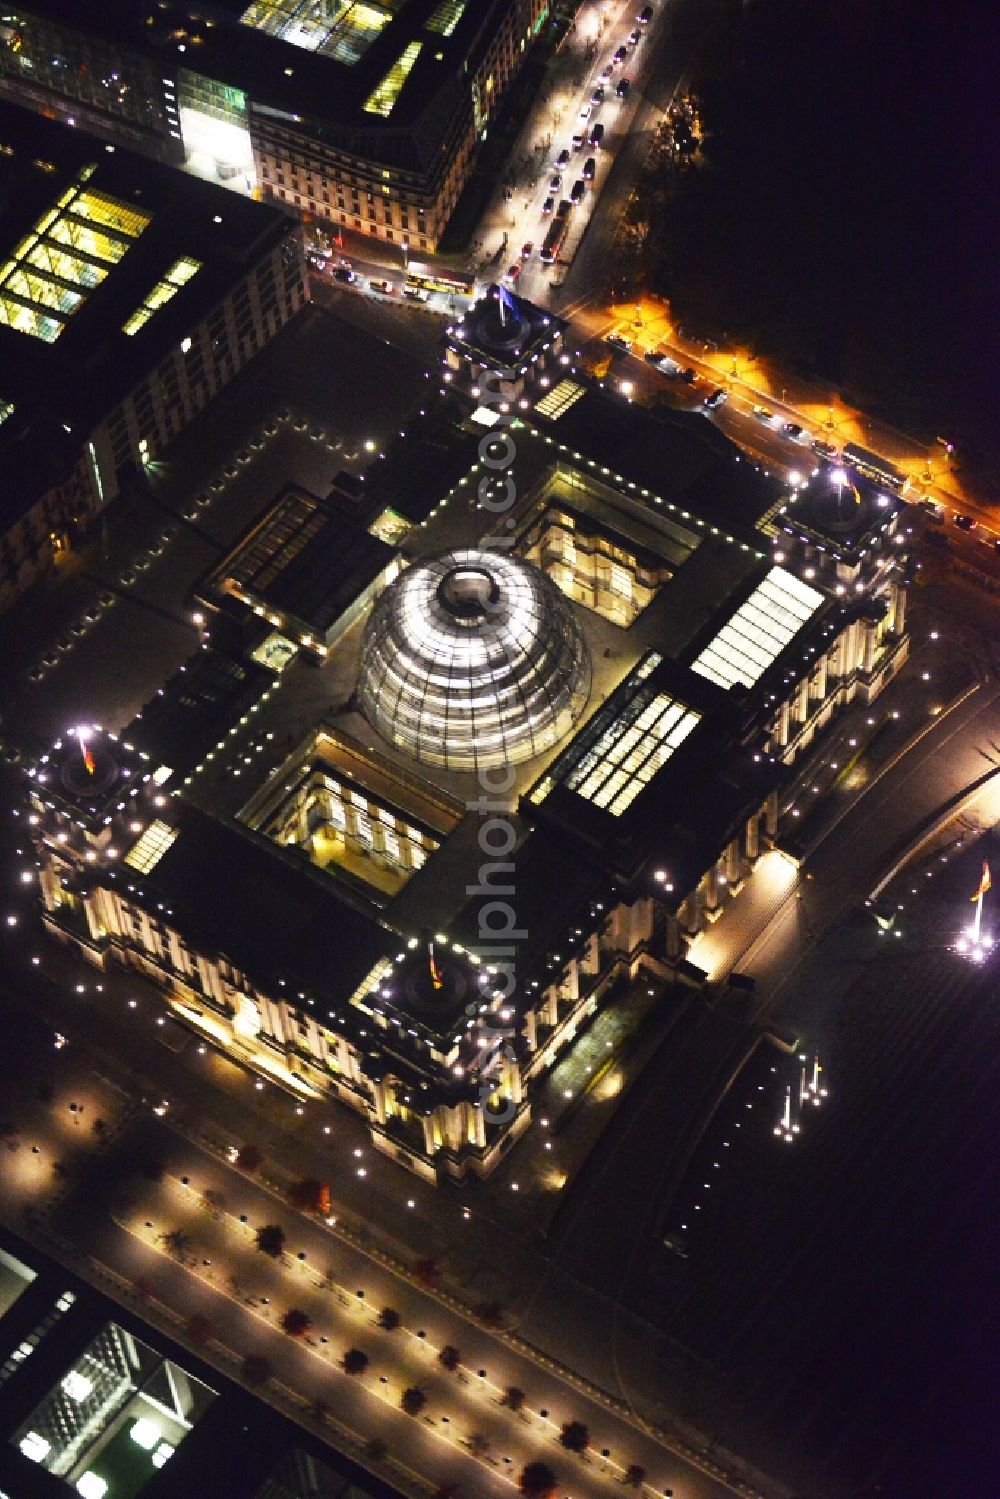 Berlin Mitte at night from above - Night aerial view from the roof and the dome of the Reichstag in Berlin - Mitte